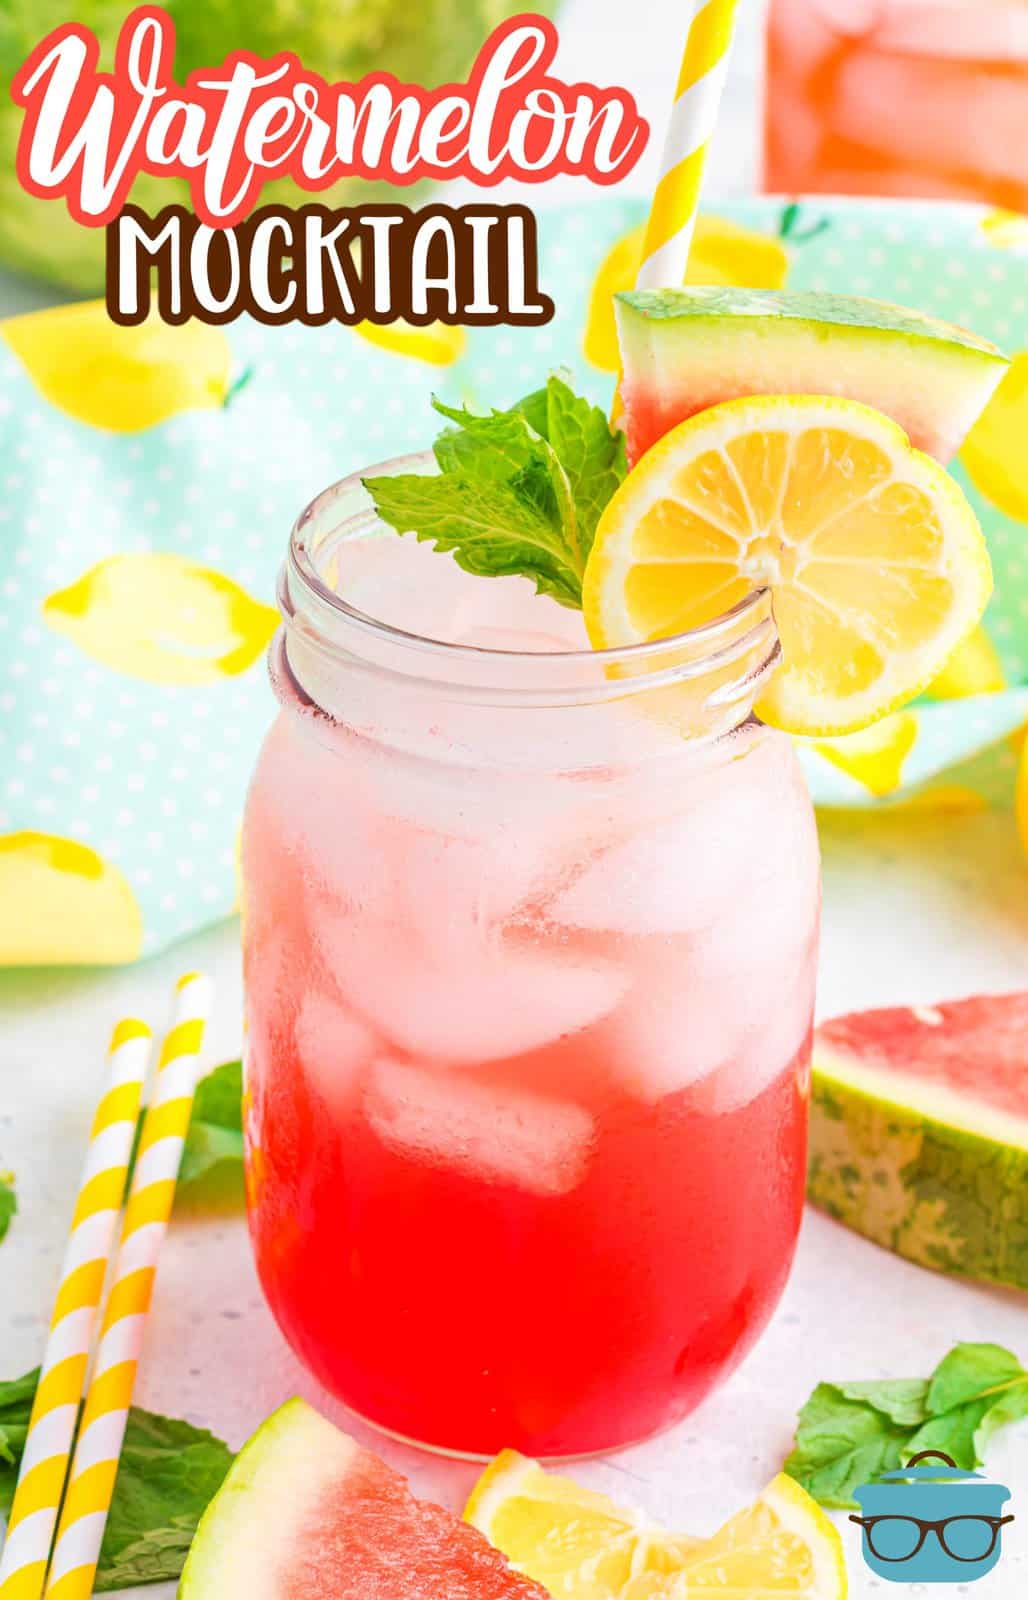 Pinterest image of finished Watermelon Mocktail Recipe in glass with ice and garnishes with fruit and mint behind it.